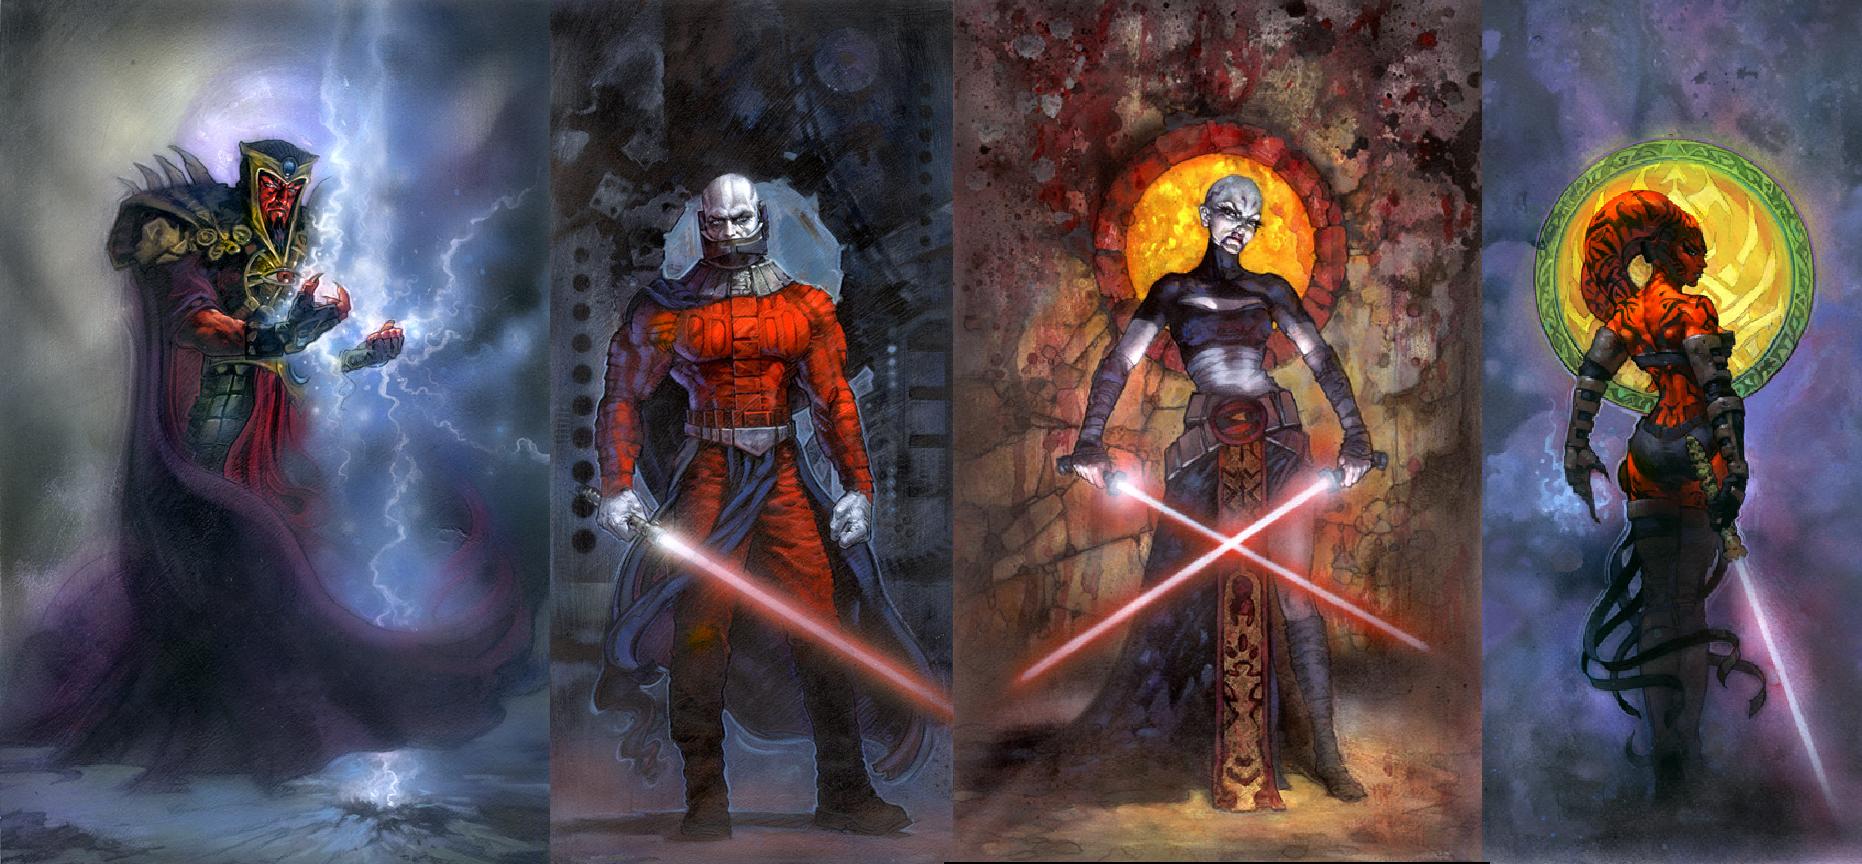 Les seigneurs sith onSith Sith Lord and Star Wars Sith